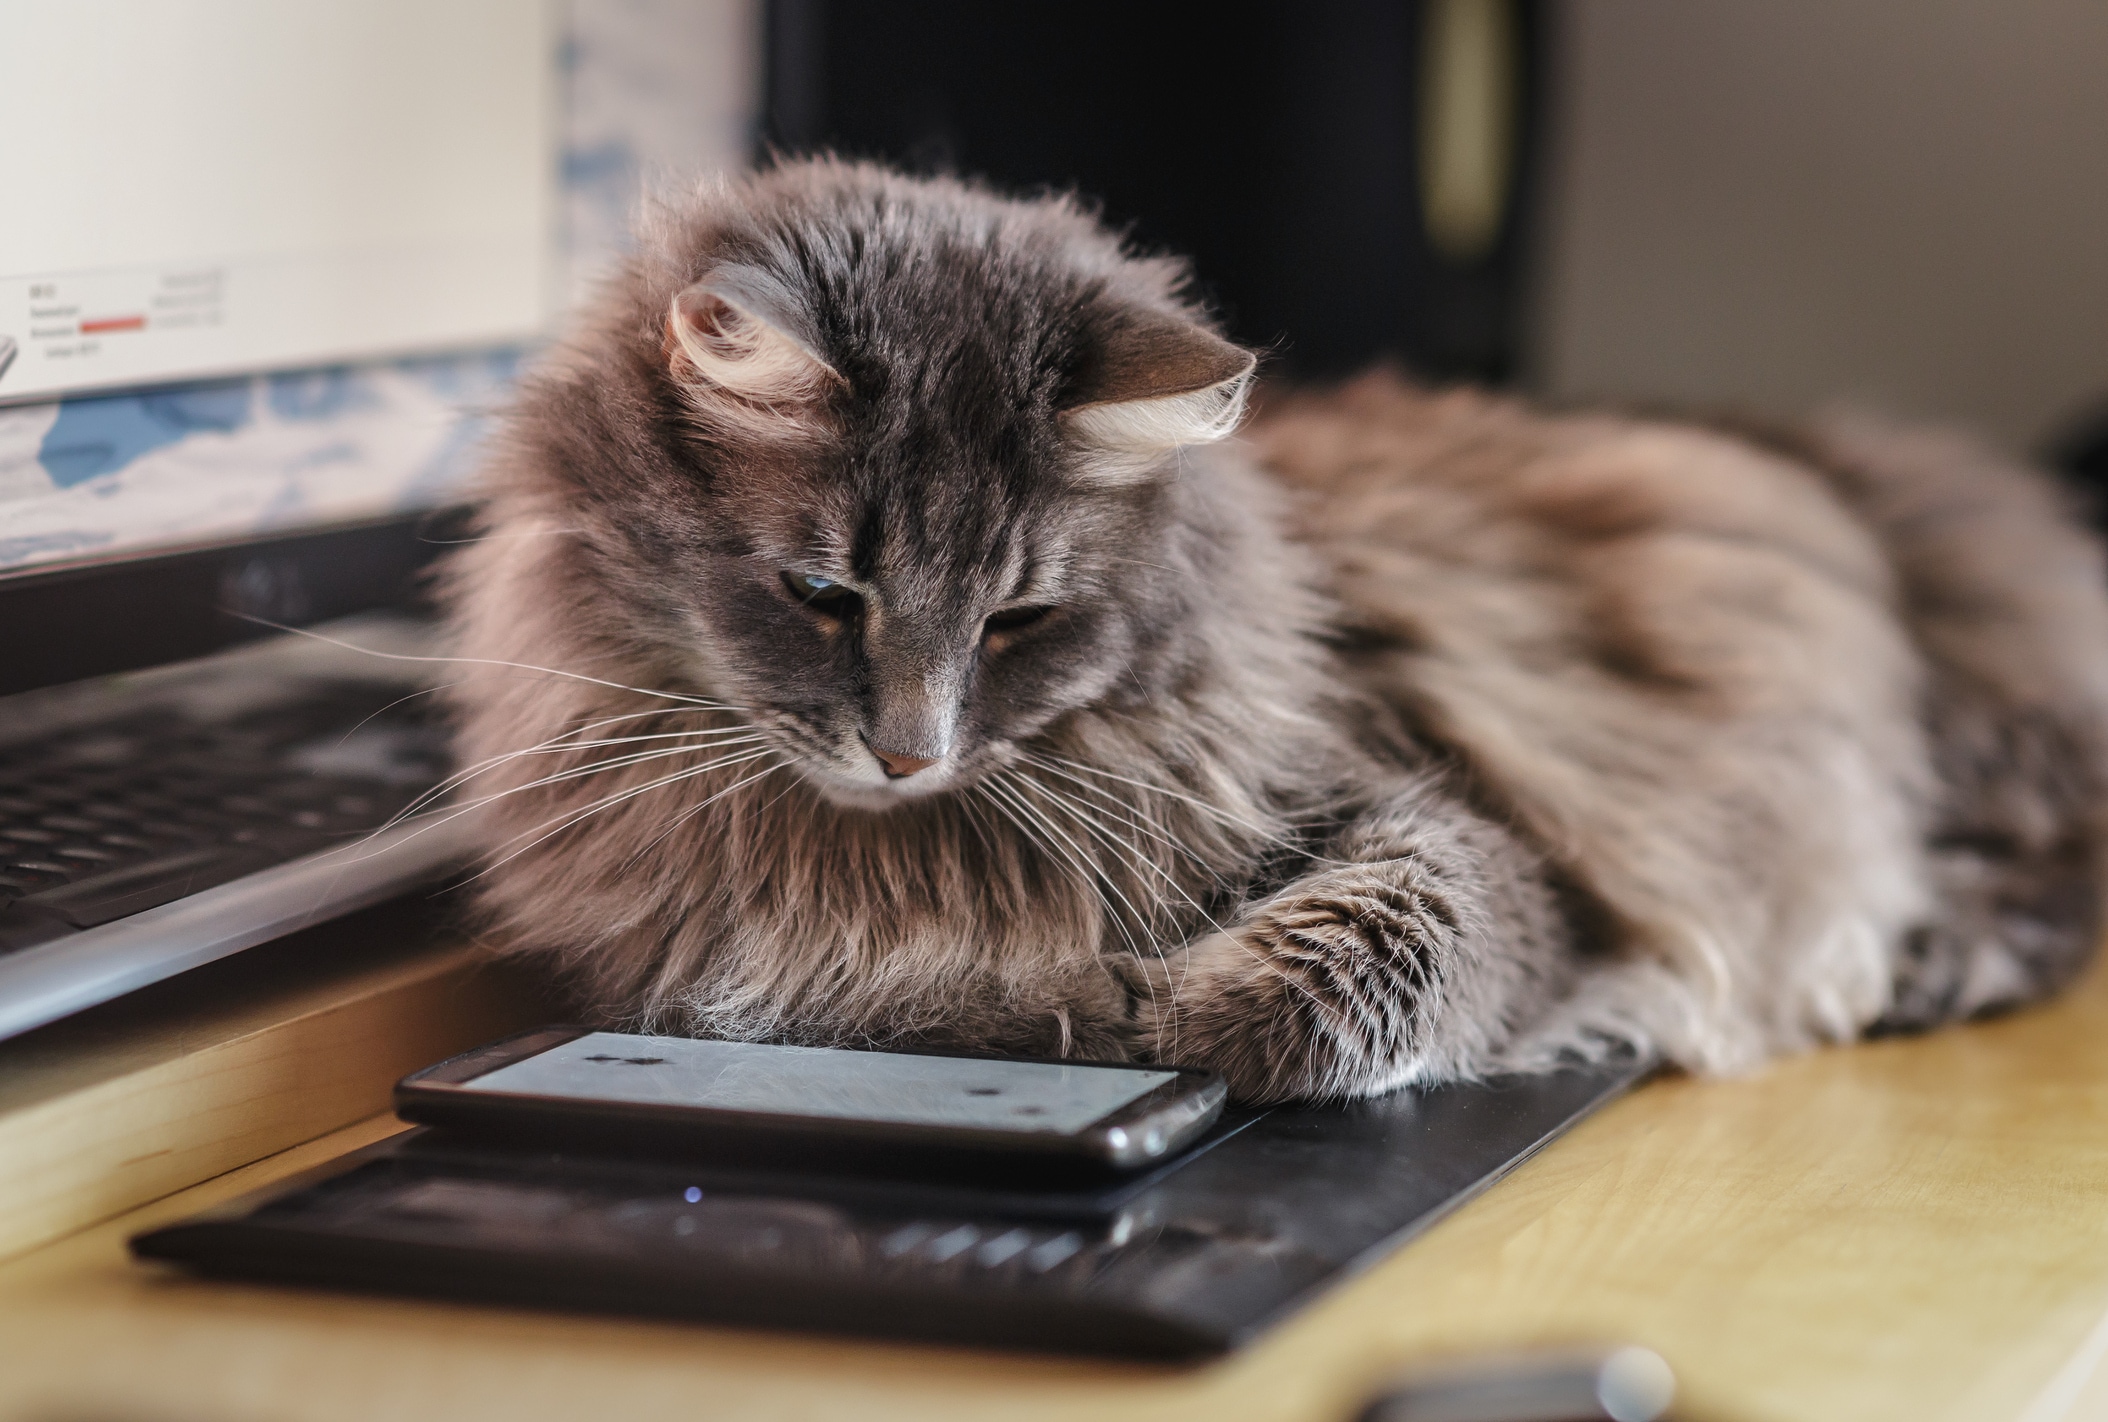 How to Tell if a Cat is Smart | PetMD